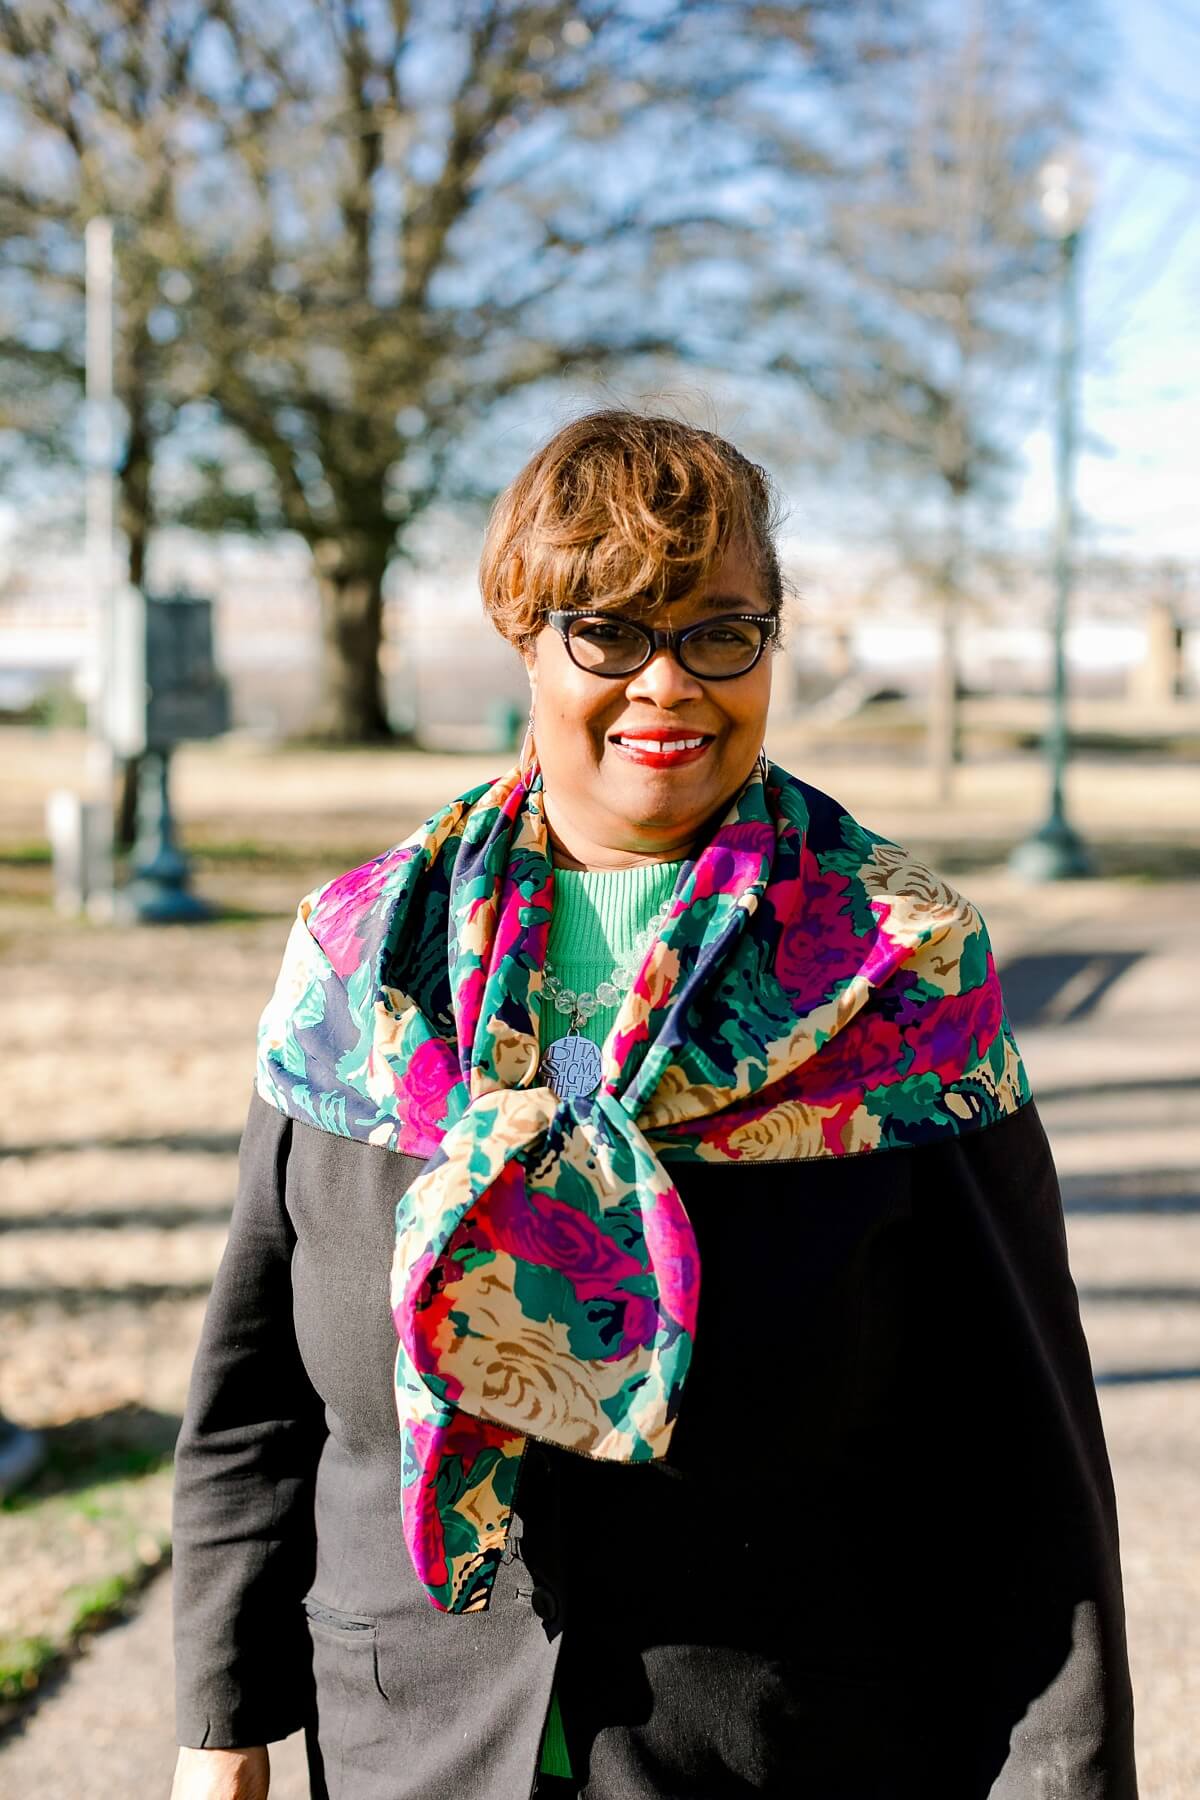 Meet the former President of the National Civil Rights Museum and the current Interim CEO of the Greater Memphis Chamber, Beverly Robertson!